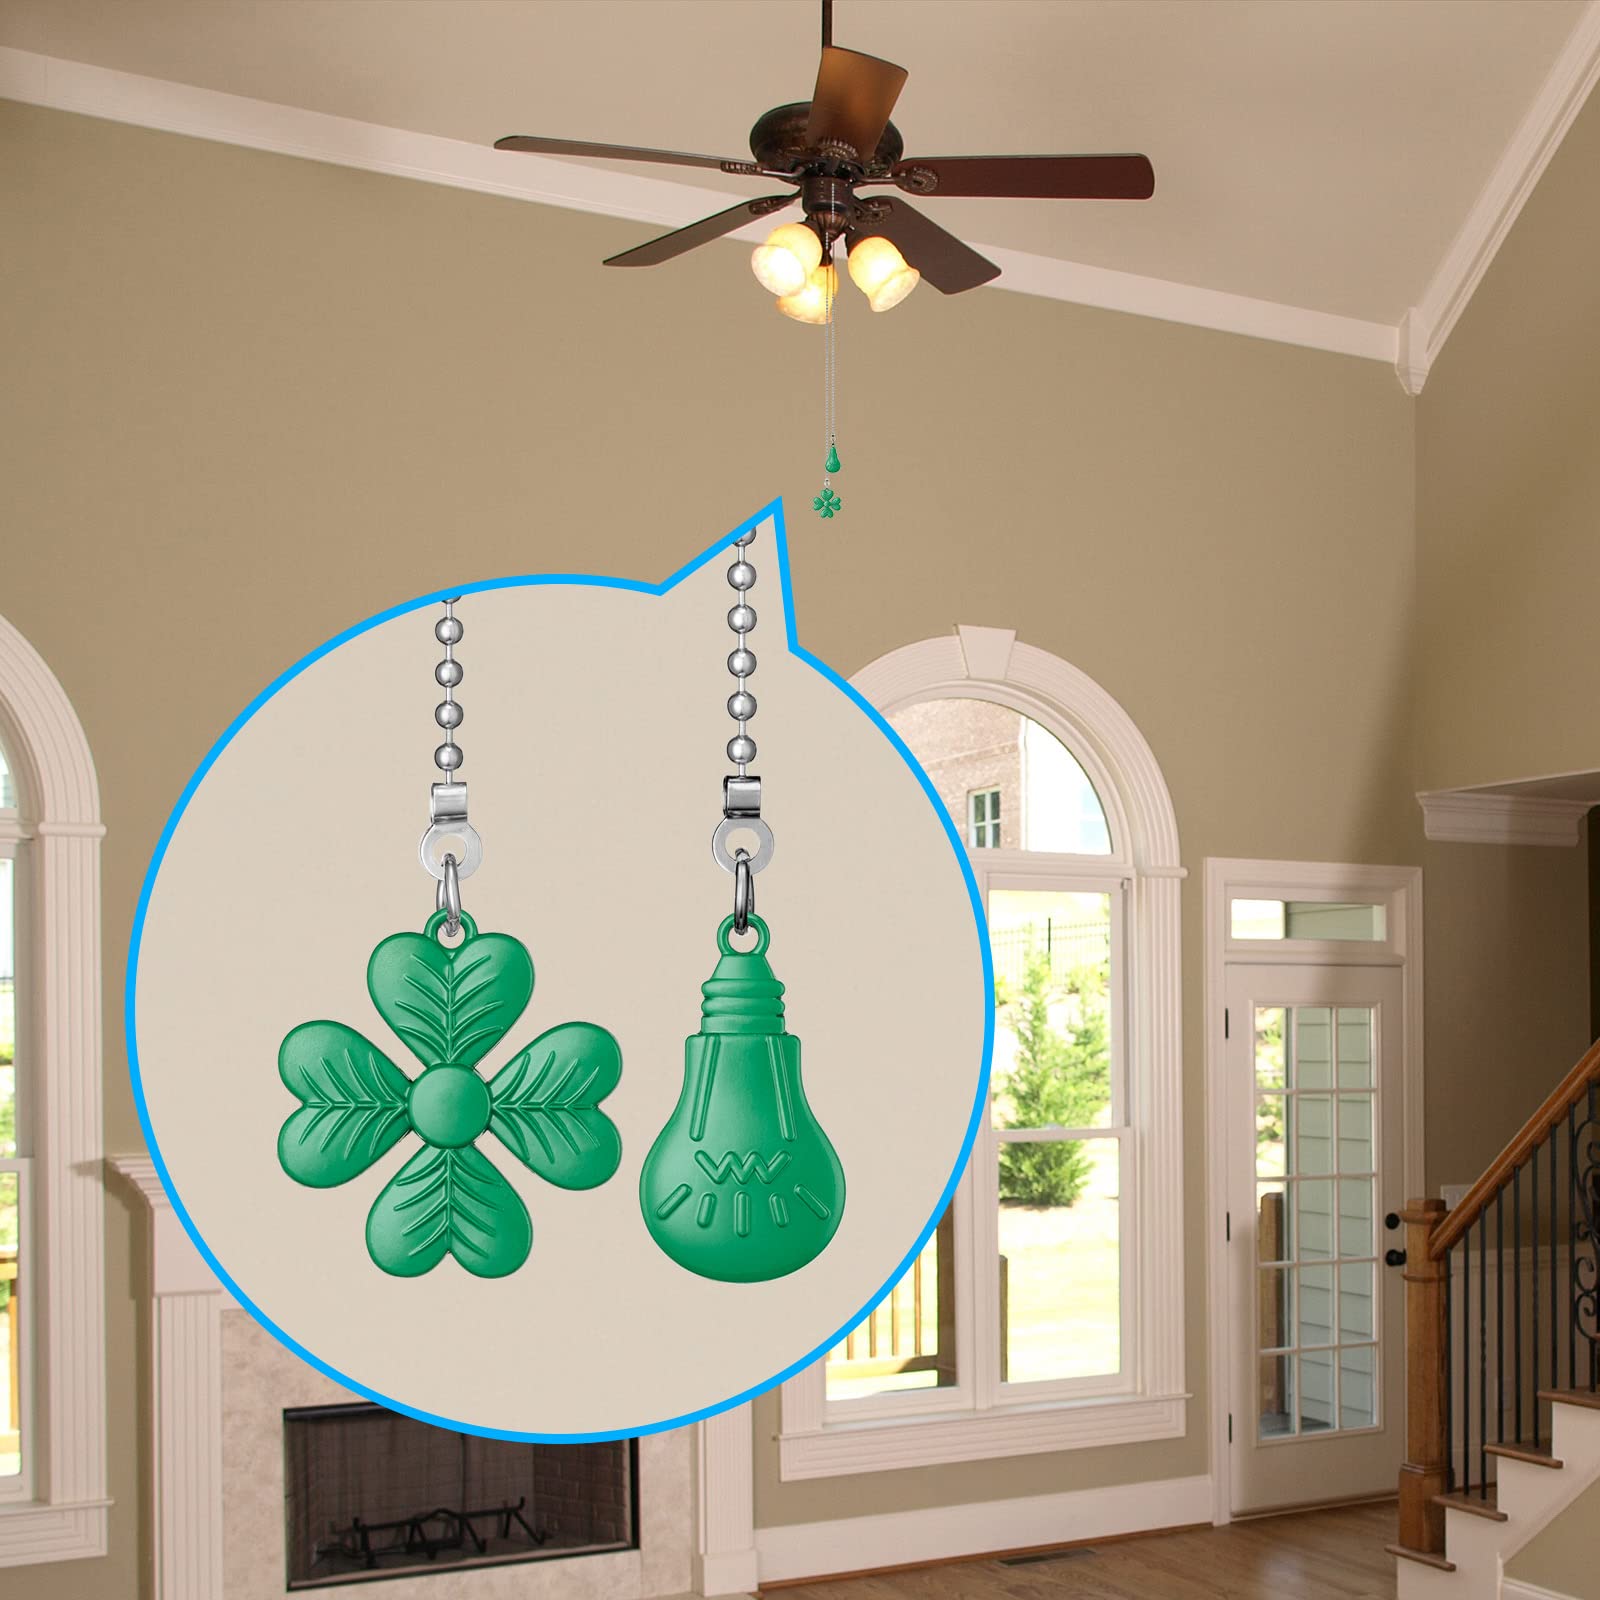 2 Pieces Ceiling Fan Pull Chain Set, Light Bulb and Fan Pattern Pull Chain Extension 12 Inch 3mm Diameter Beaded Ball Connector Best for use with Ceiling Fan Lighting (Green)